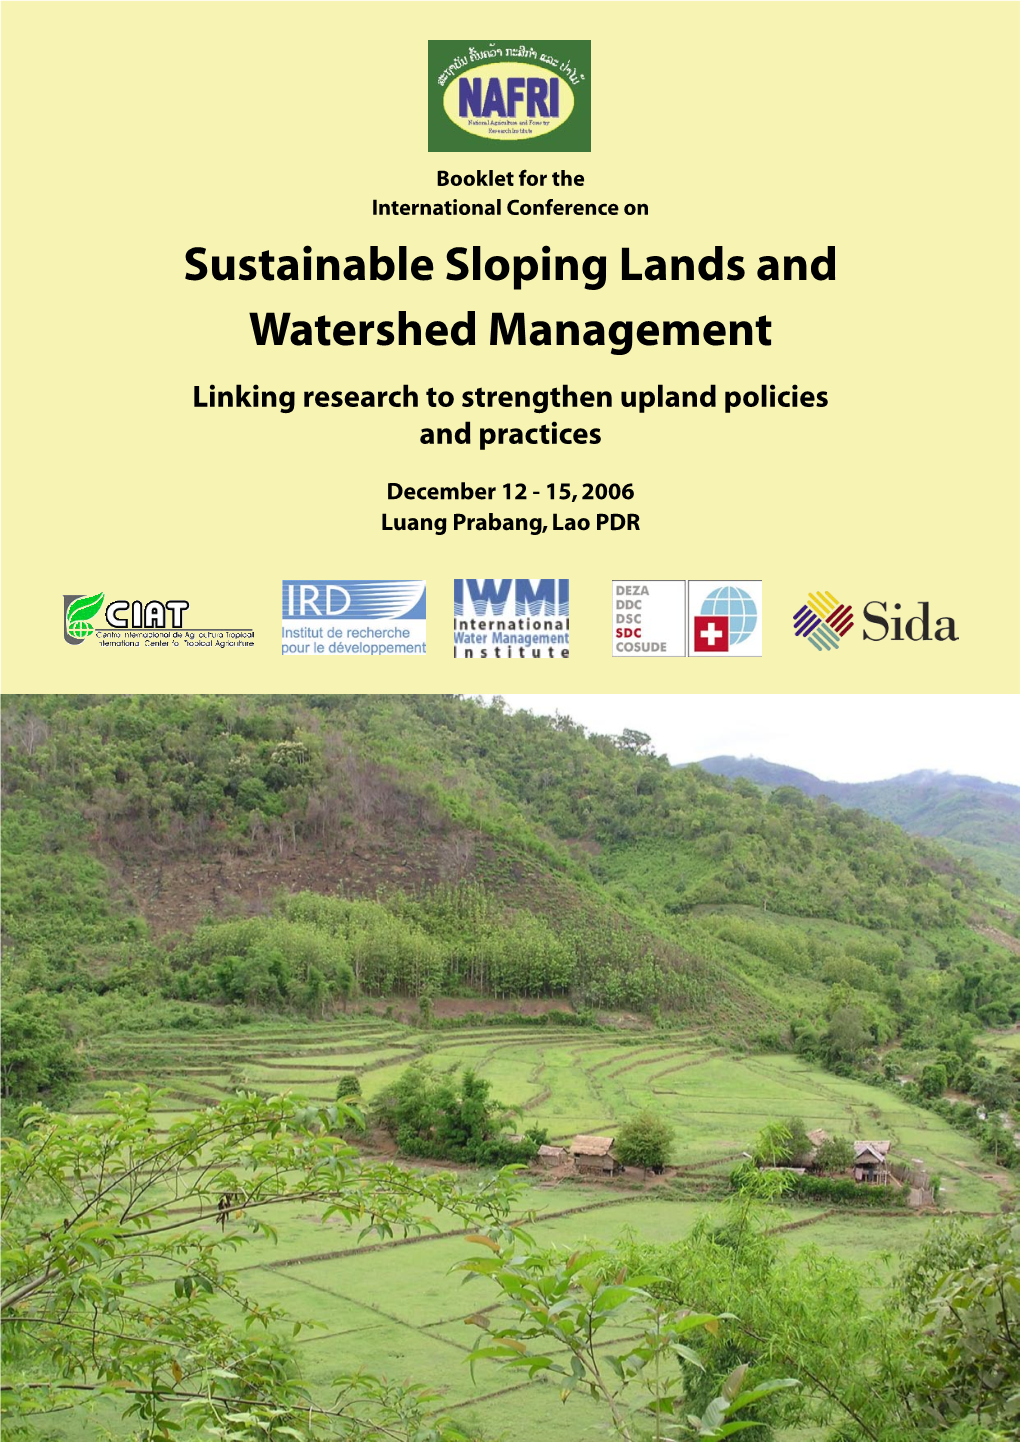 Sustainable Sloping Lands and Watershed Management Linking Research to Strengthen Upland Policies and Practices